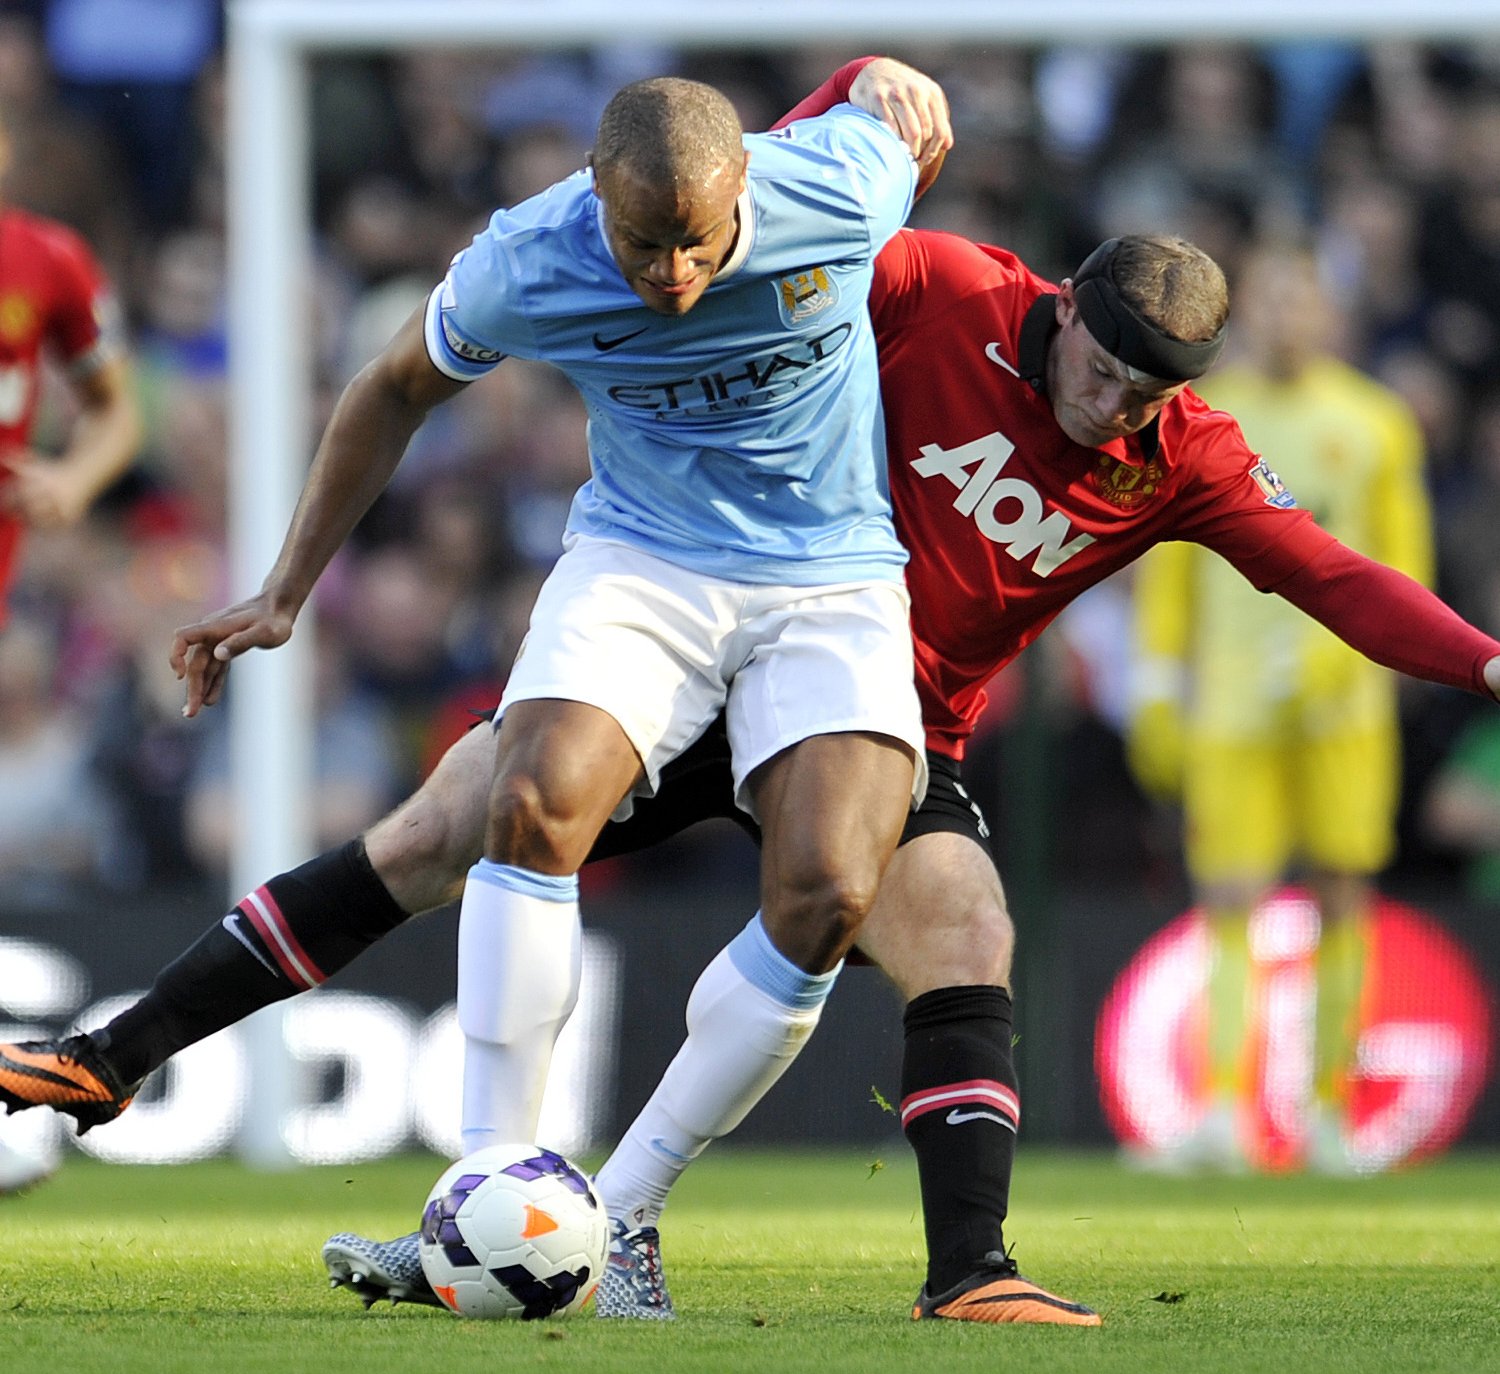 Man City vs. Man United: Live Score, Highlights from Manchester Derby